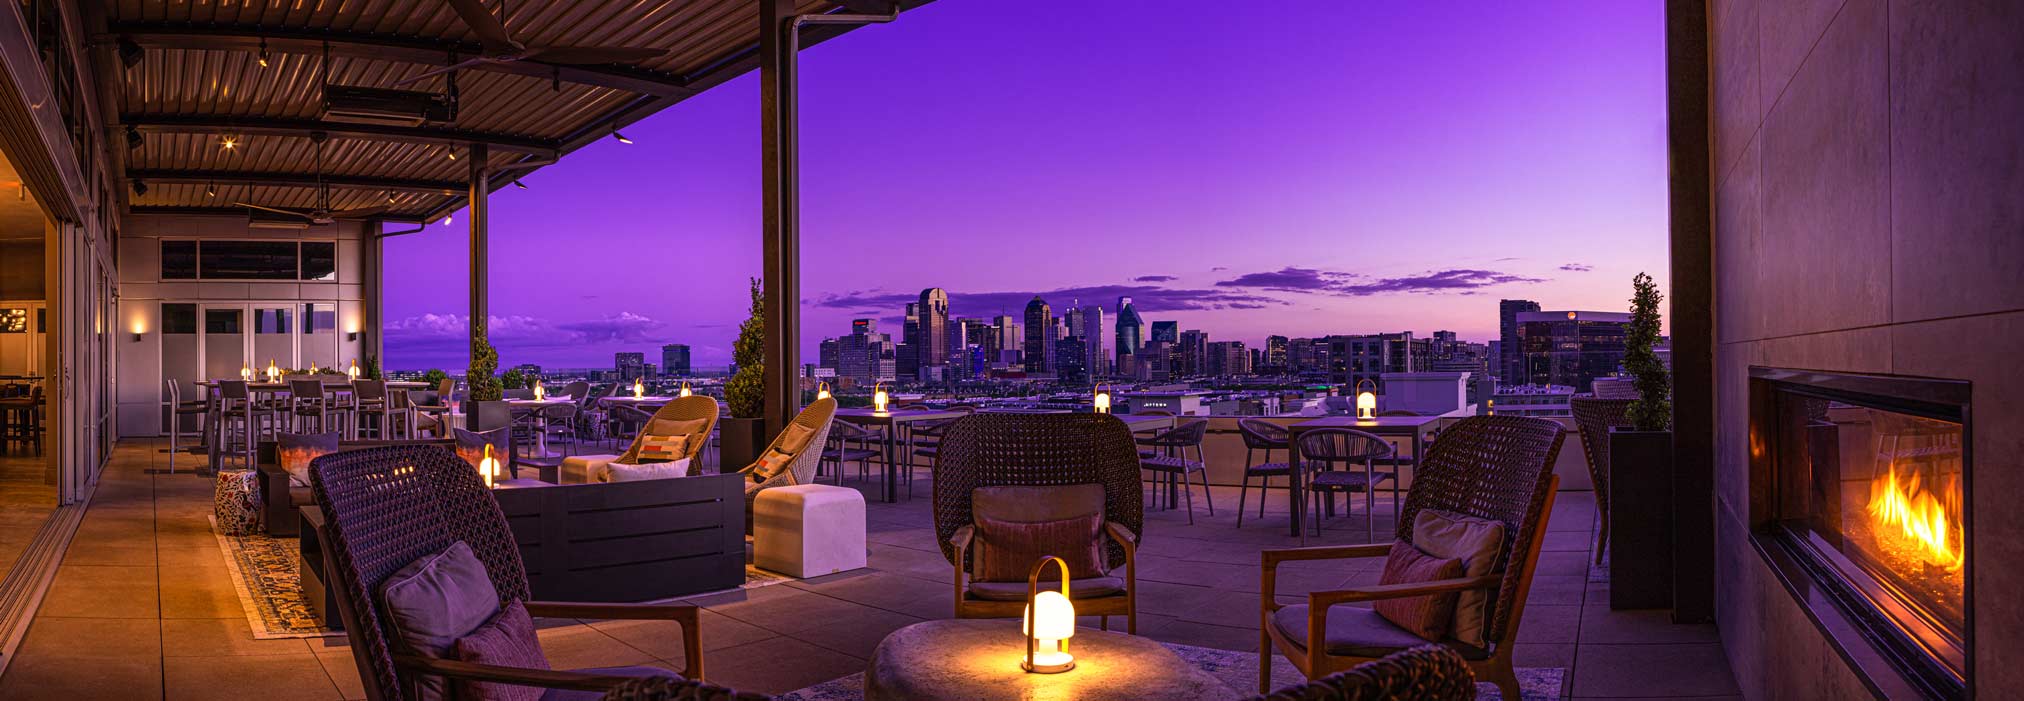 Dallas Uptown Rooftop Dining